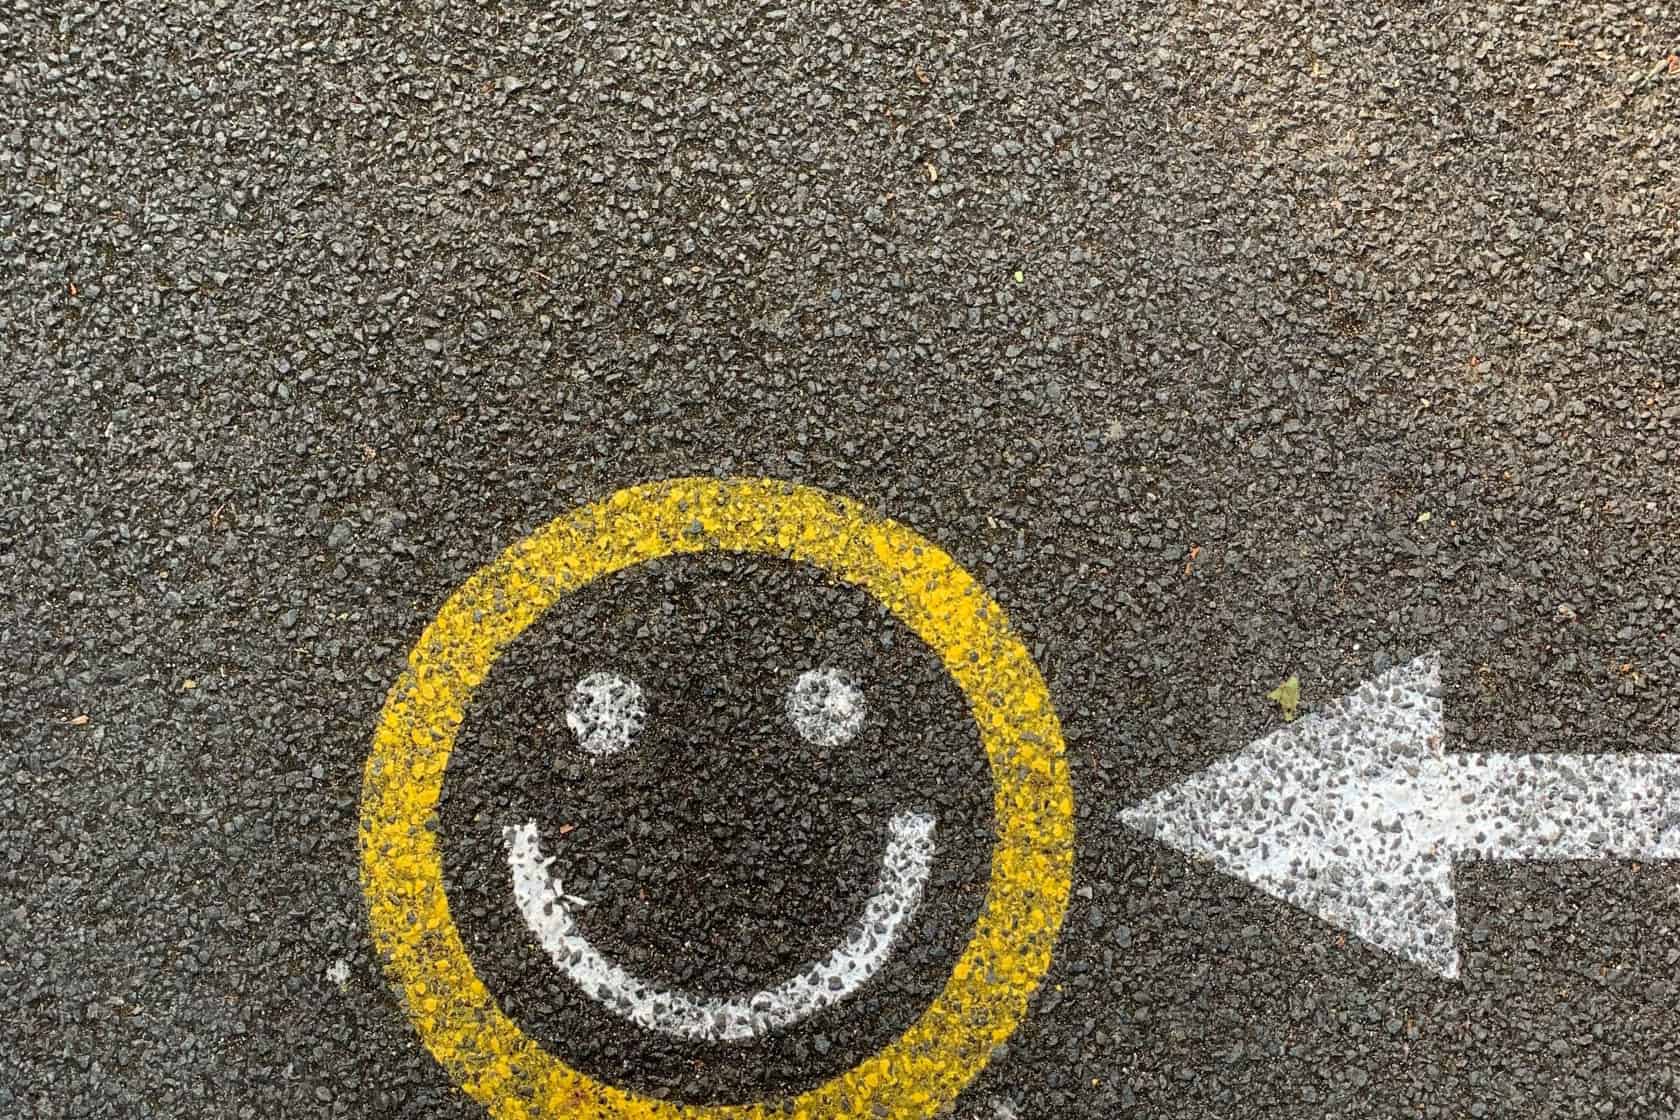 Are you happy with your productivity tool? Smiley face painted on the ground.